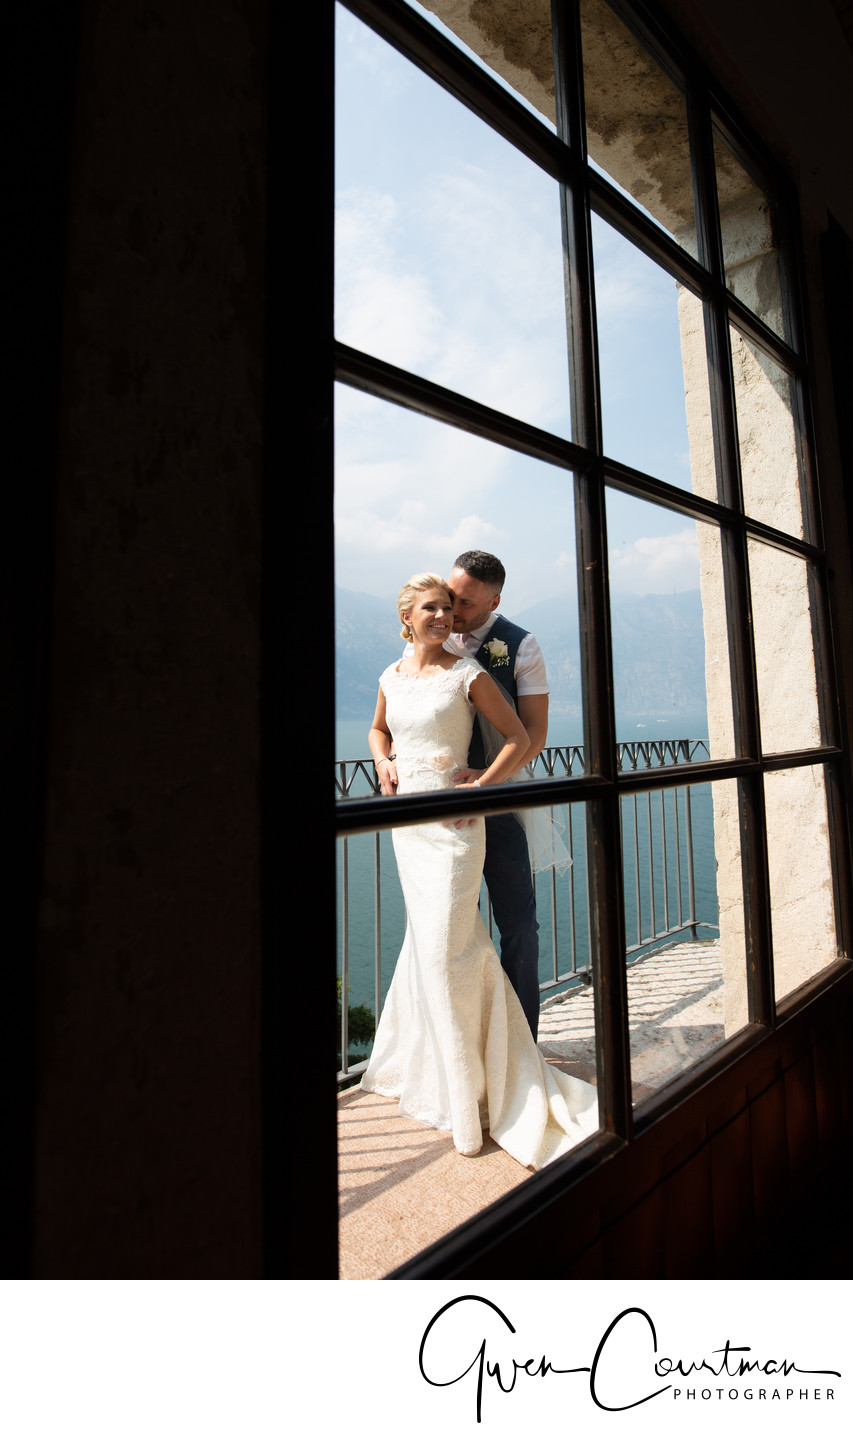 Bride and Groom in a window, Malcesine Castle, Italy